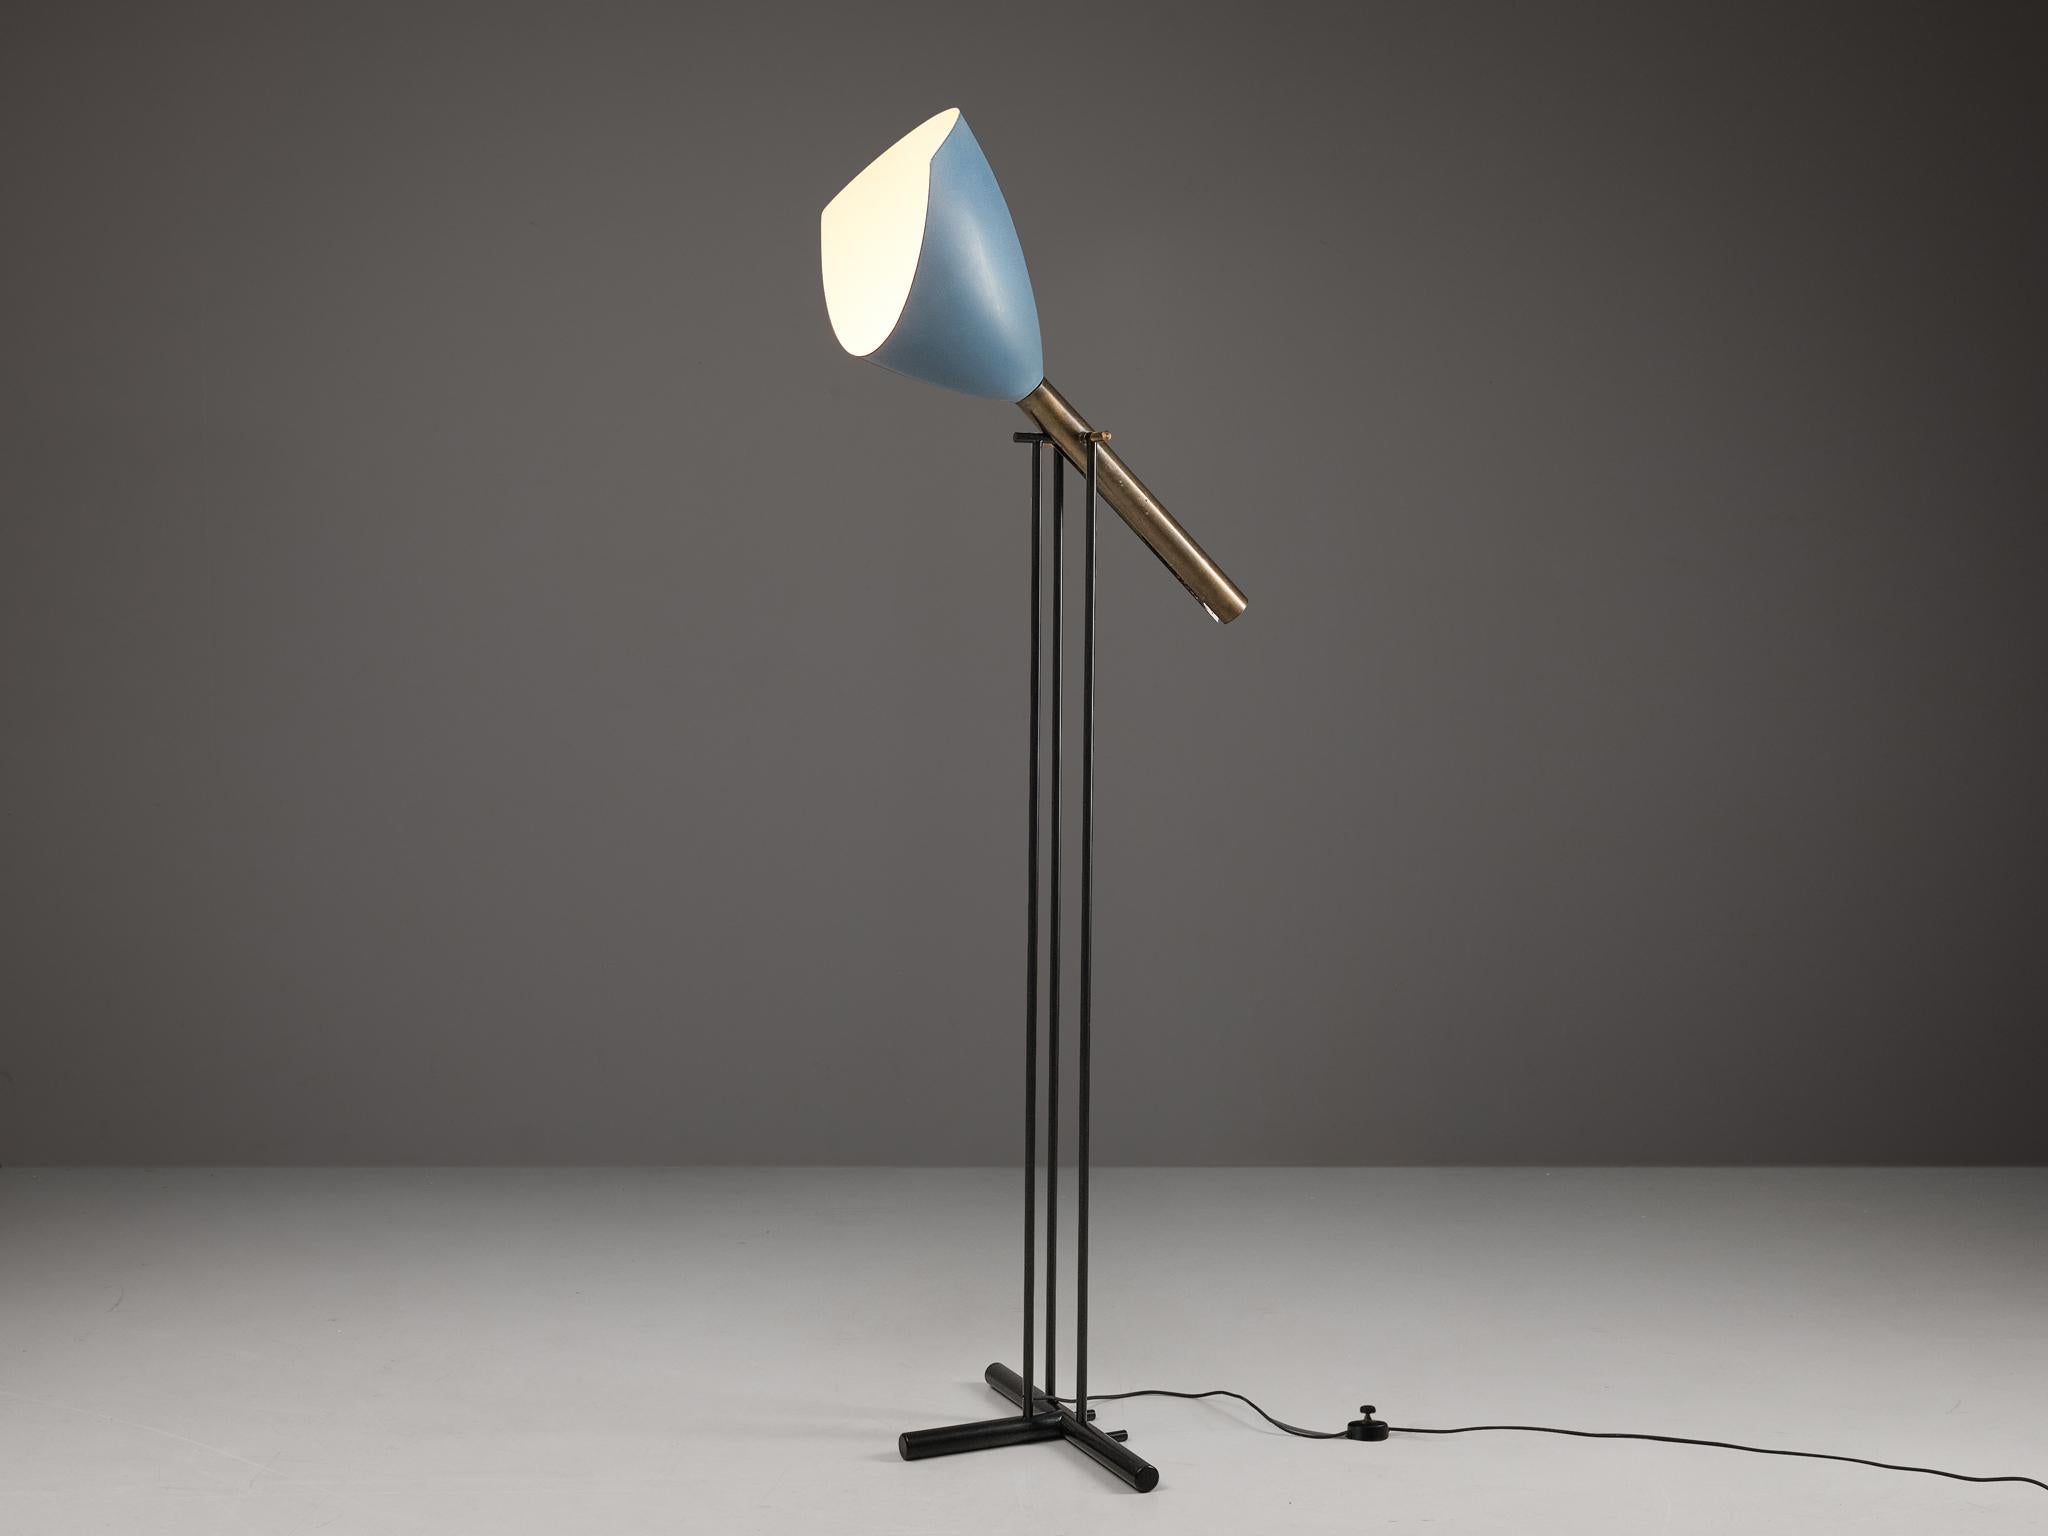 Angelo Lelii for Arredoluce, floor lamp ‘Televisione’, model 12627, polished brass, lacquered aluminum, coated steel, Italy, circa 956 

This ‘Televisione’ floor lamp model 12627 is designed by Angelo Lelii for Arredoluce. The construction